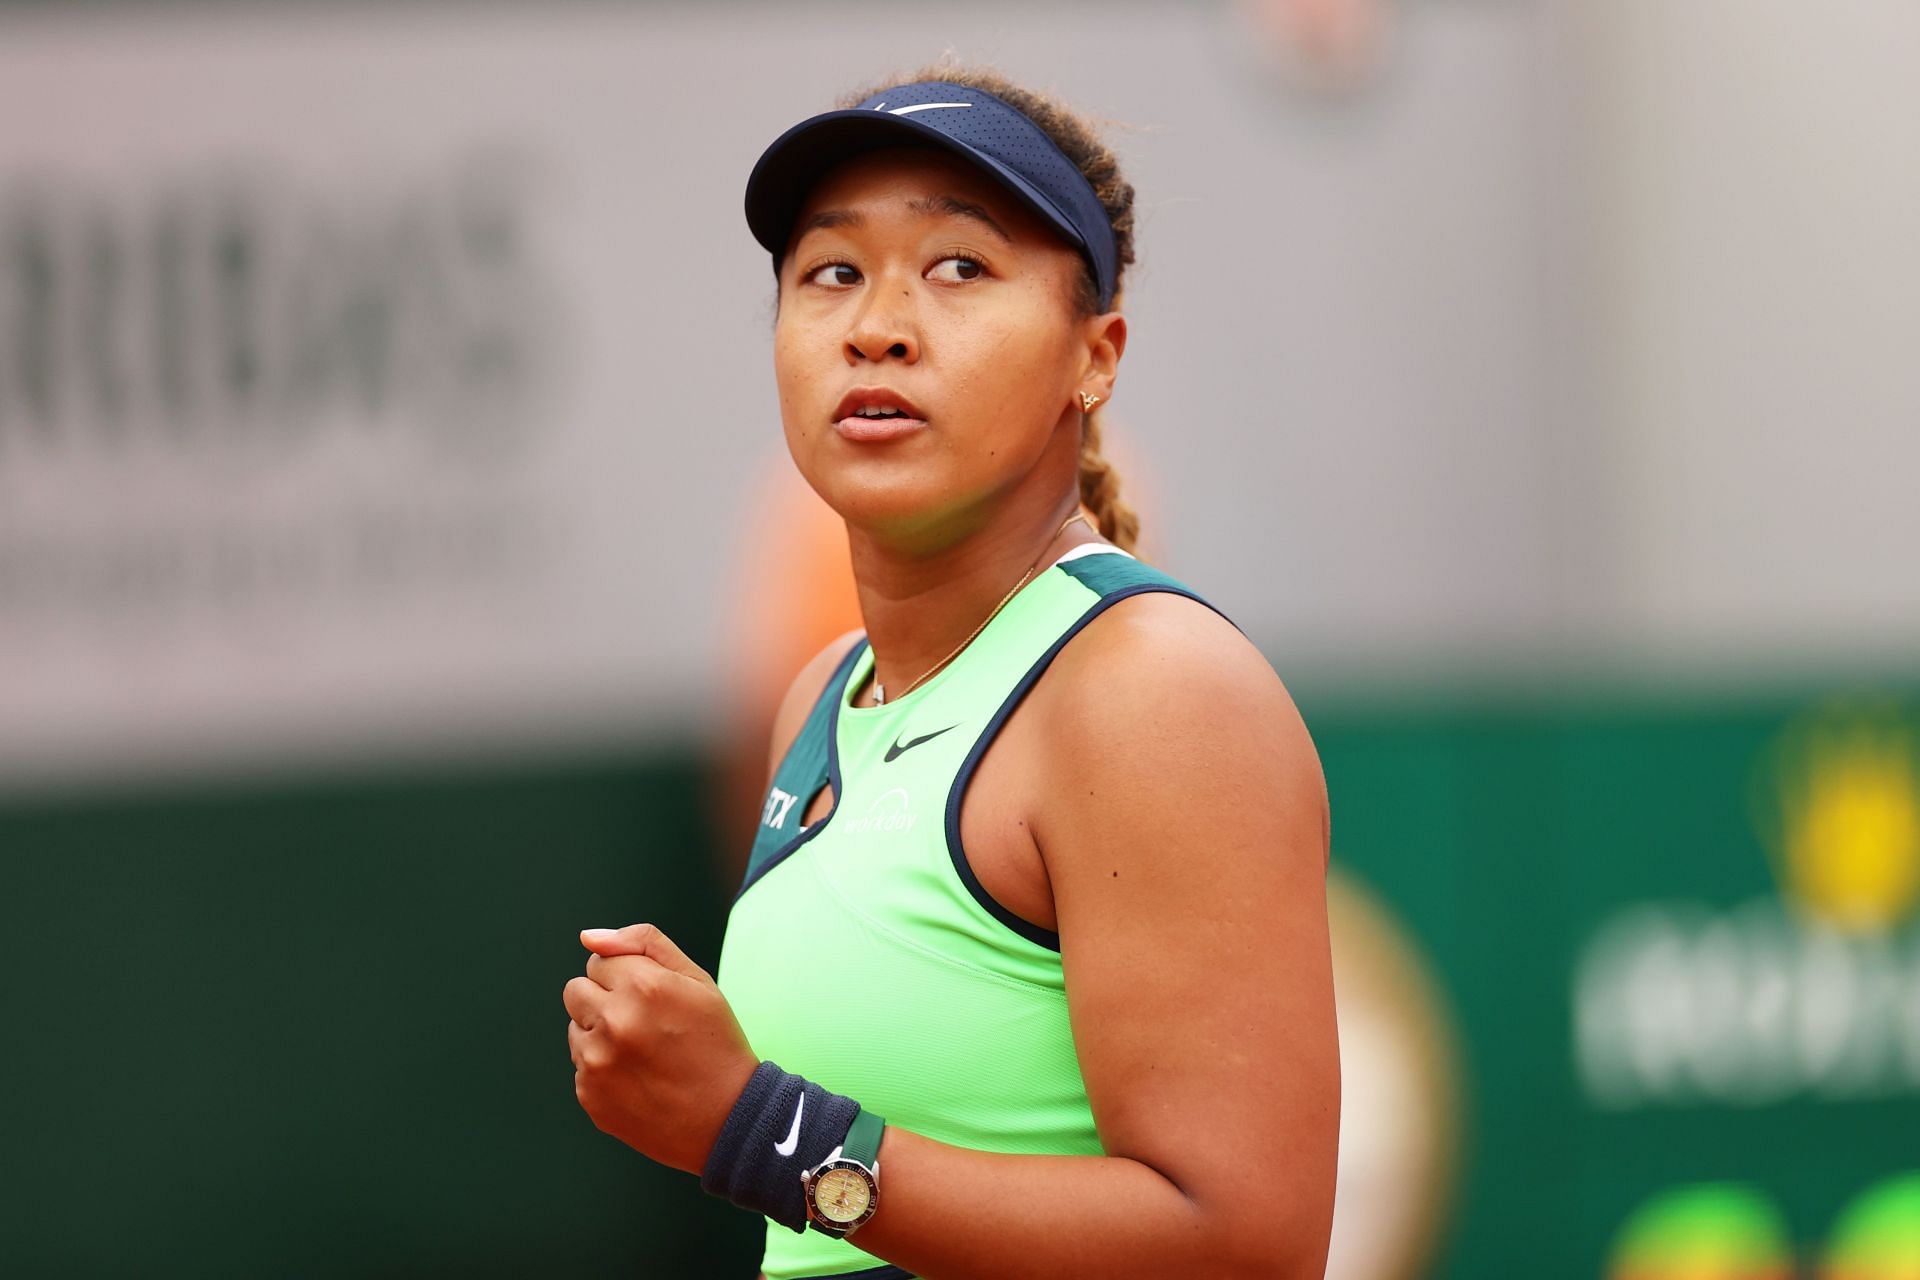 Naomi Osaka will play the Silicon Valley Classic.